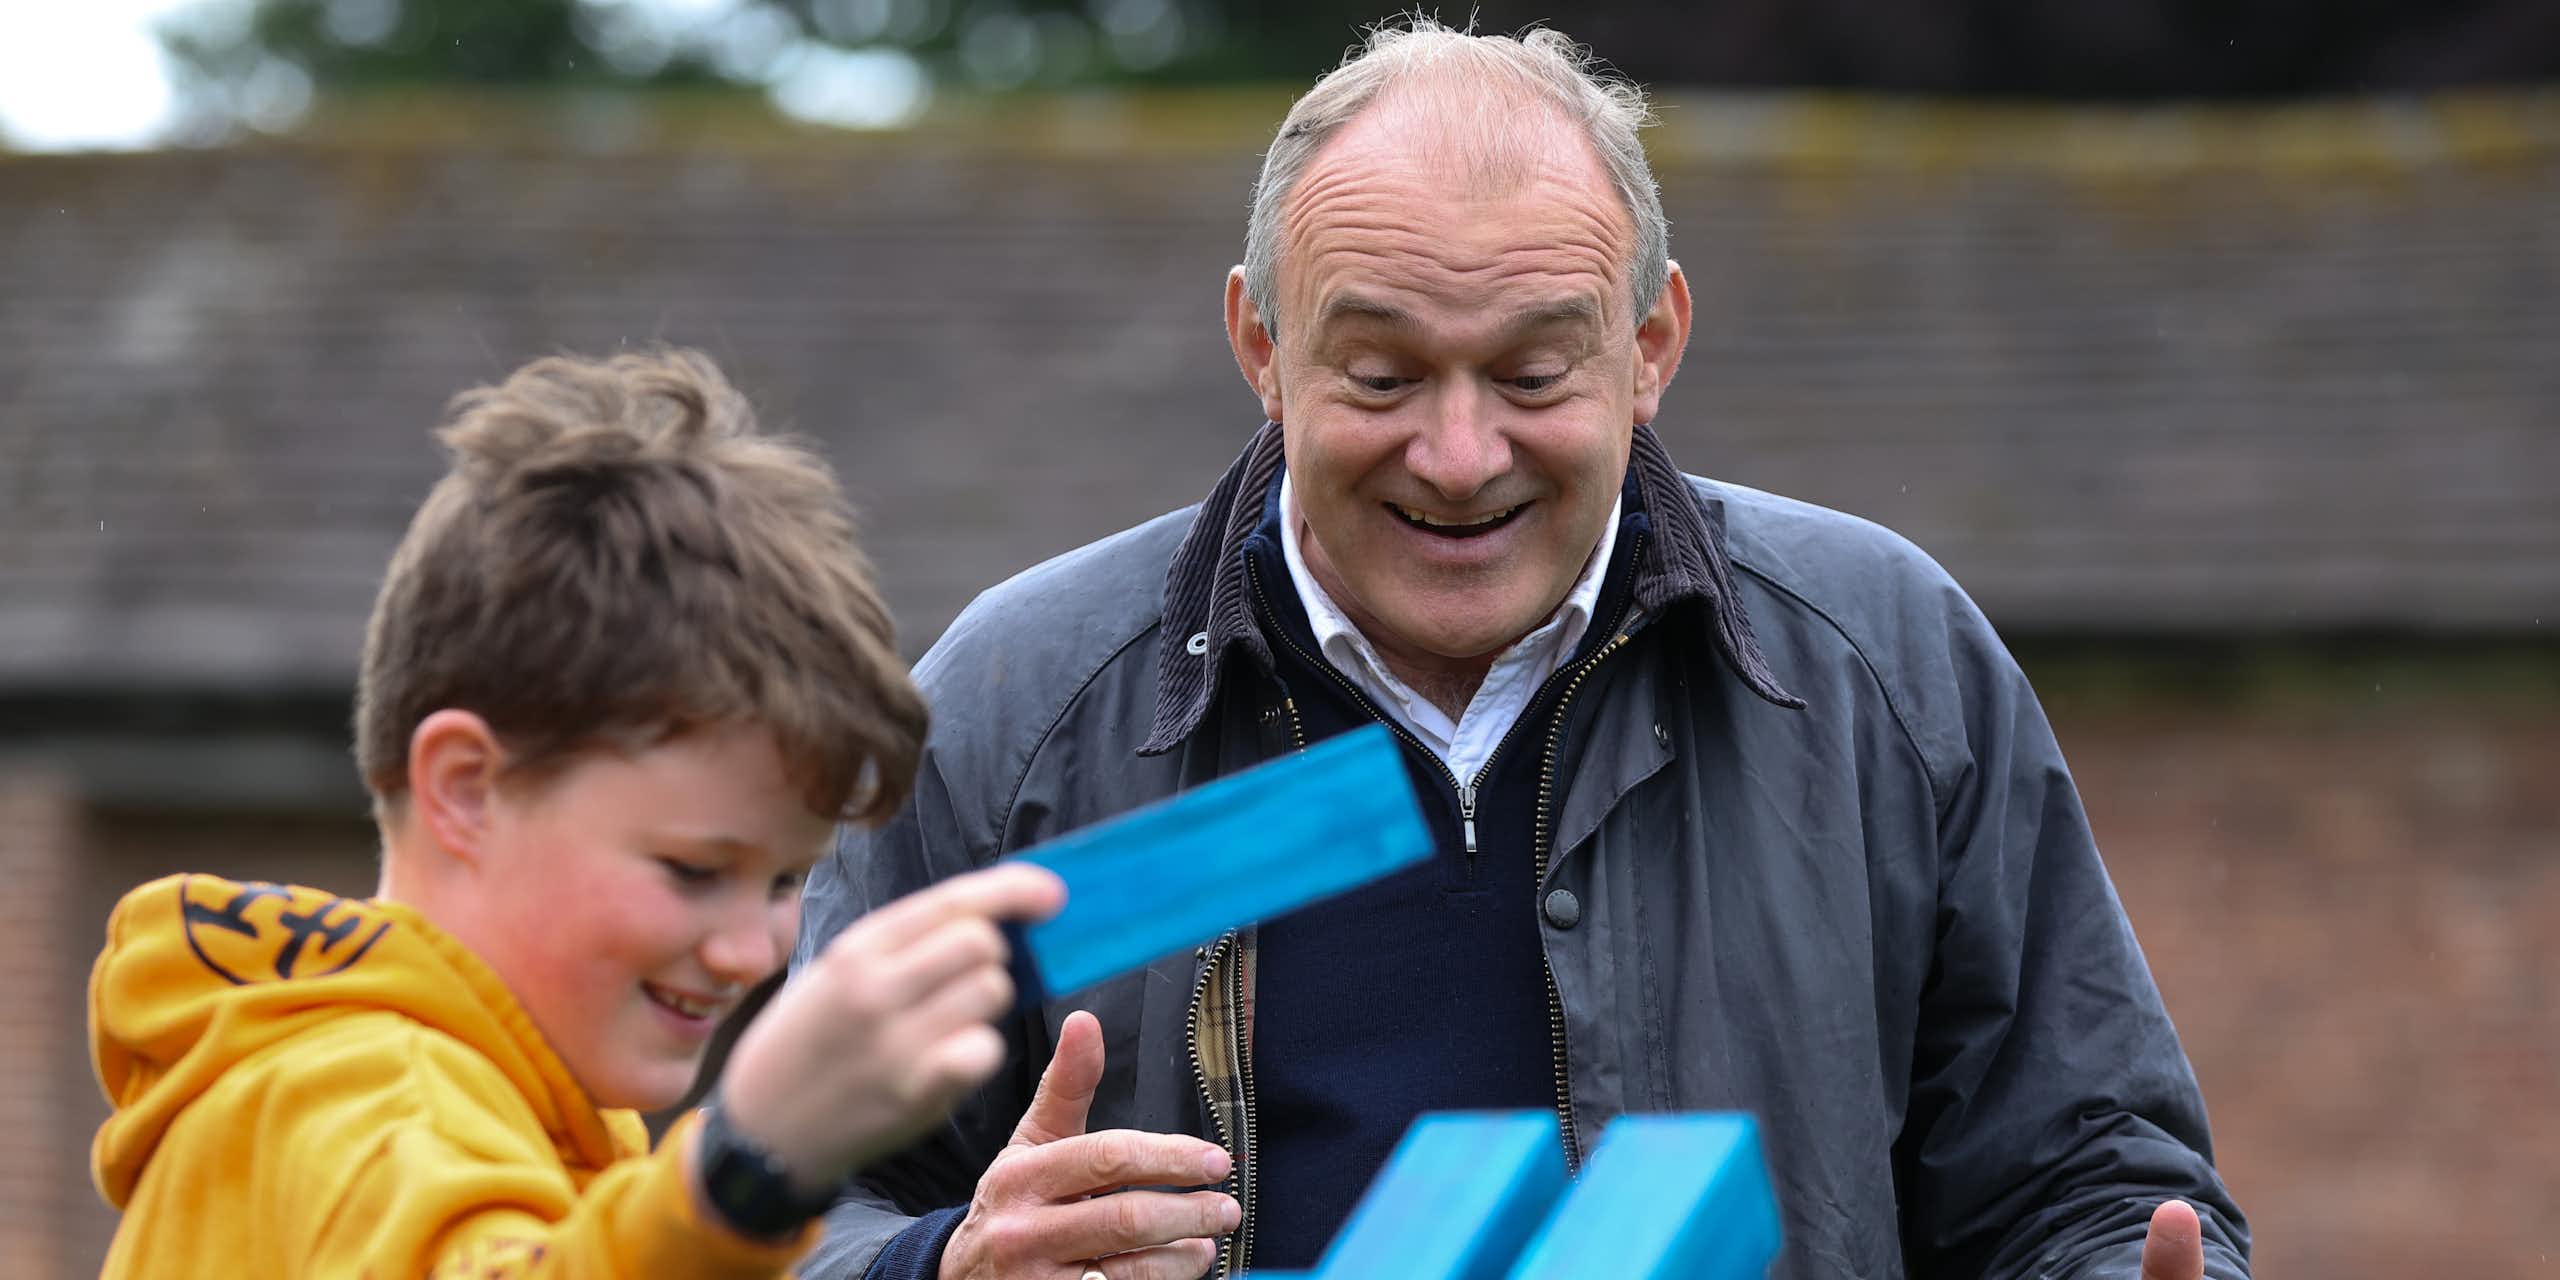 Liberal Democrat leader Ed Davey playing jenga with a child.